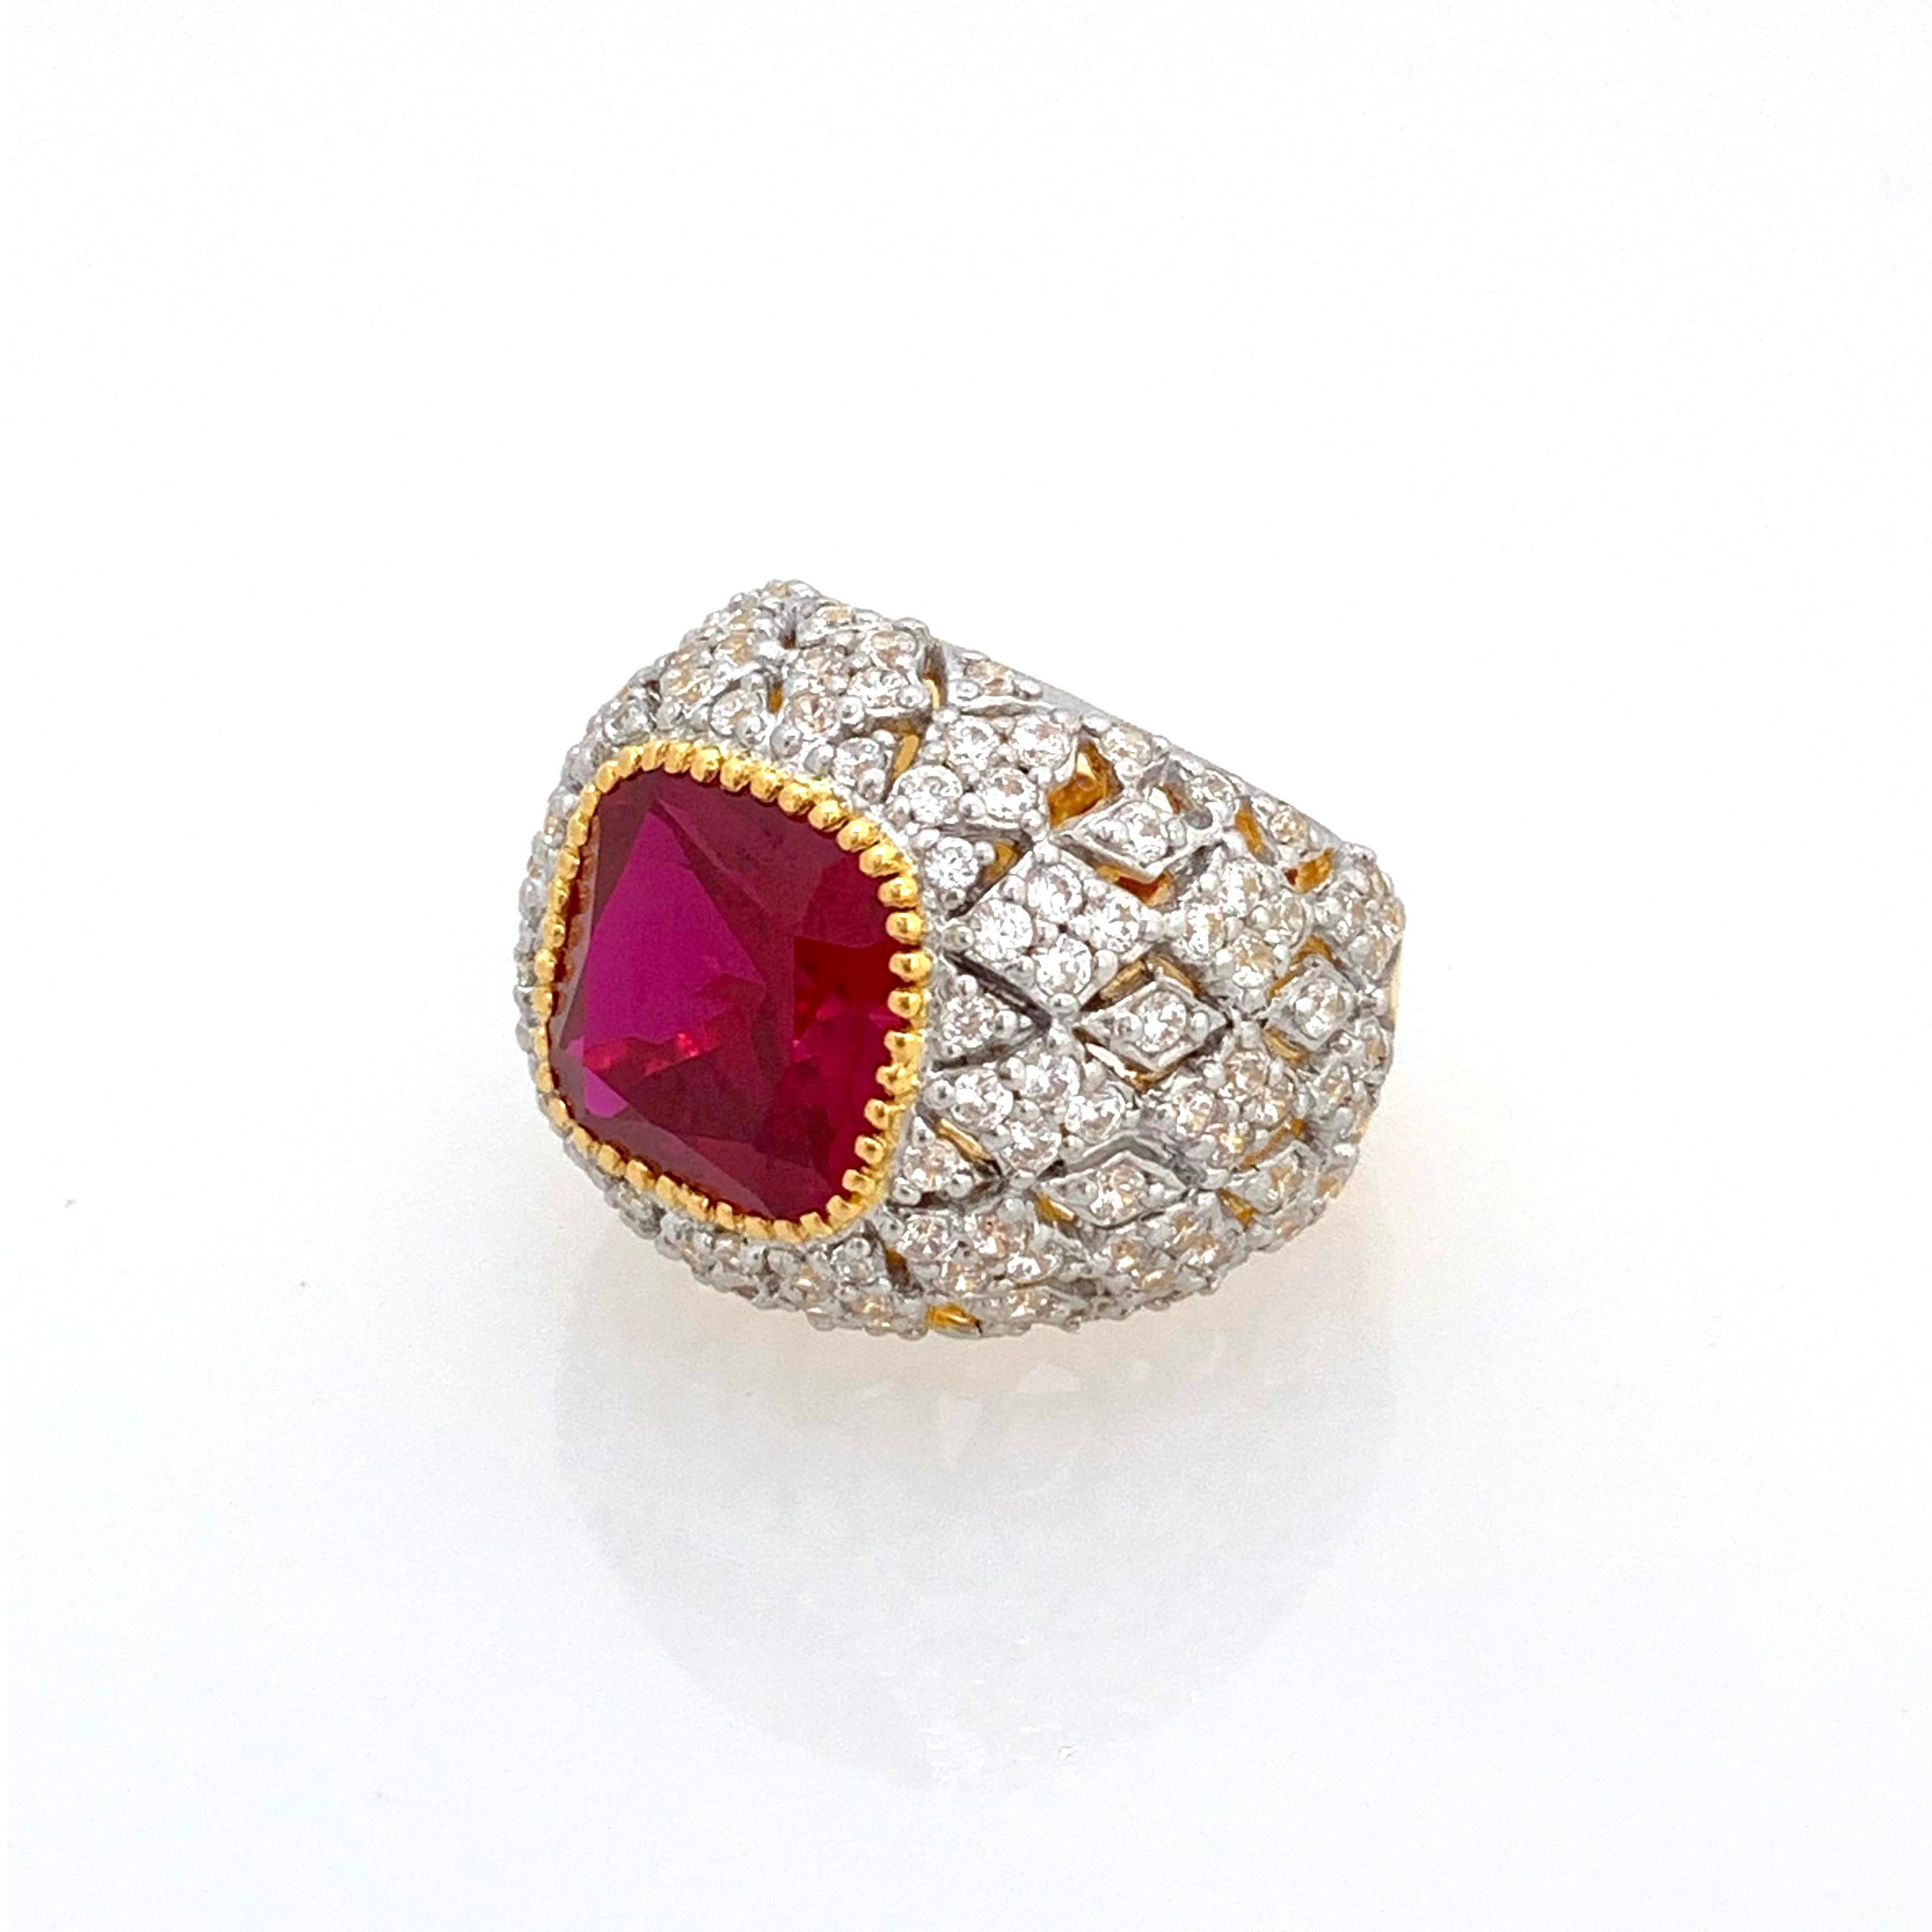 Bijoux Num Sterling Silver Lab Ruby Bombe Dome Ring

This bold cocktail ring features beautiful top quality 5ct cushion-cut lab created ruby, surrounded with 136 round faux diamonds, handset in 18k gold vermeil with platinum rhodium over sterling